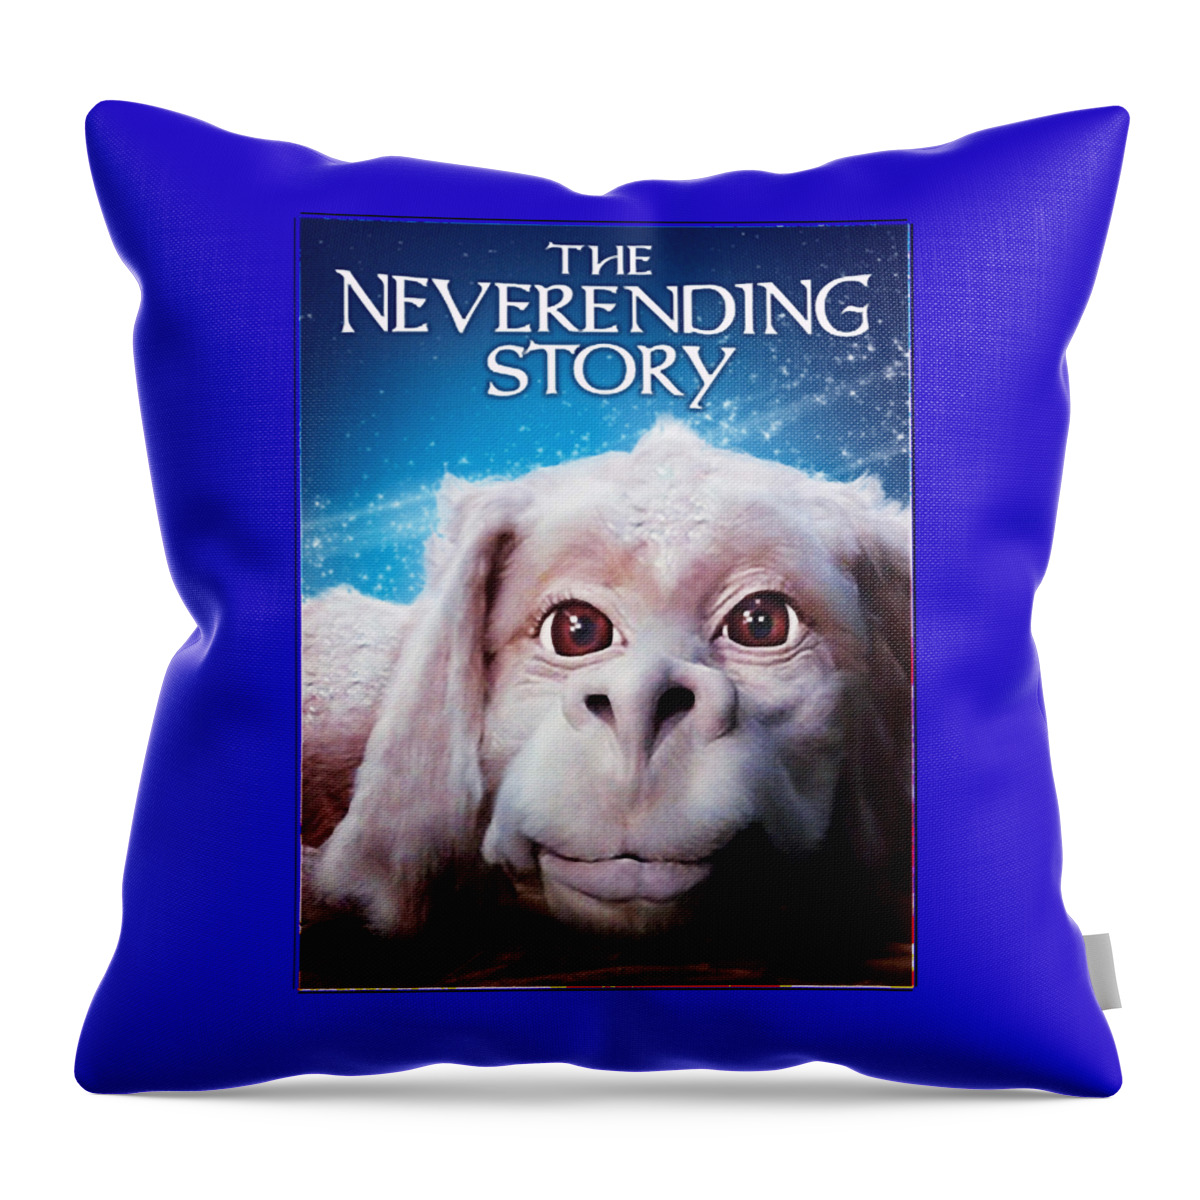 Neverending Story Throw Pillow featuring the digital art Funny Men The Neverending Story Awesome For Music Fan by Mizorey Tee